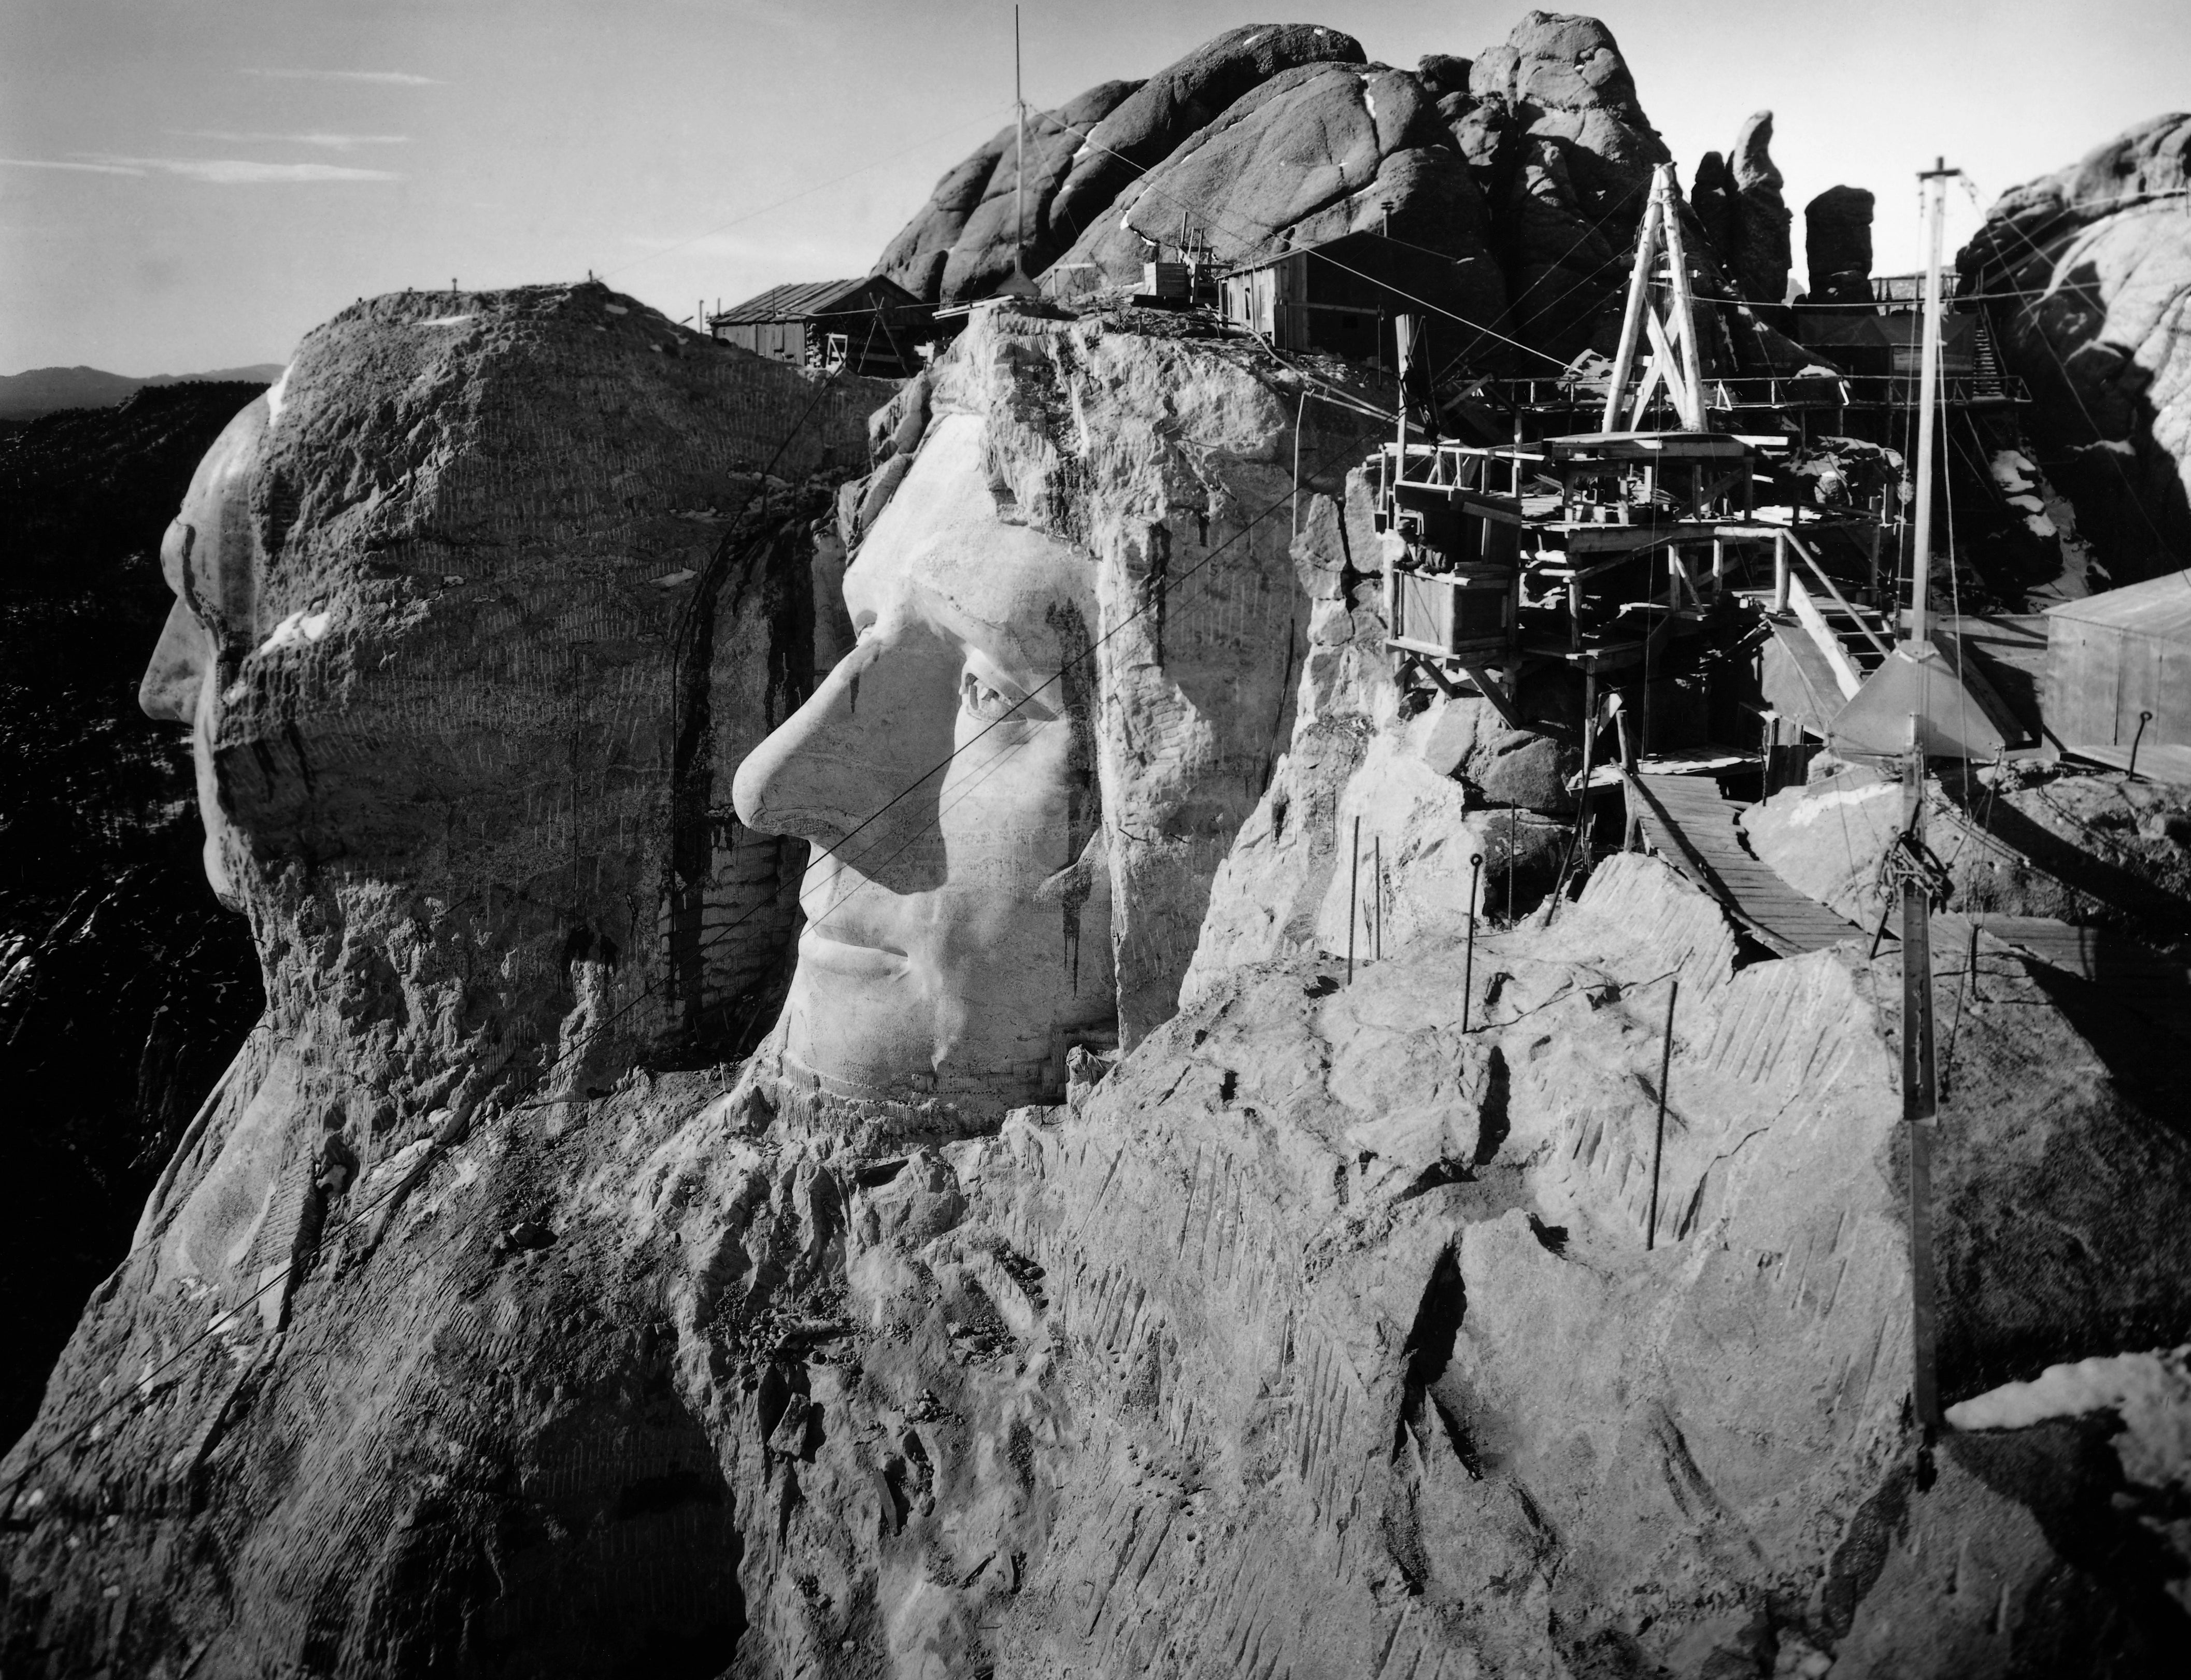 Mount Rushmore, South Dakota: The head of Washington and Jefferson from  the top of Lincoln's head. Undated photograph circa 1940s. (Photo: Bettmann, Getty Images)